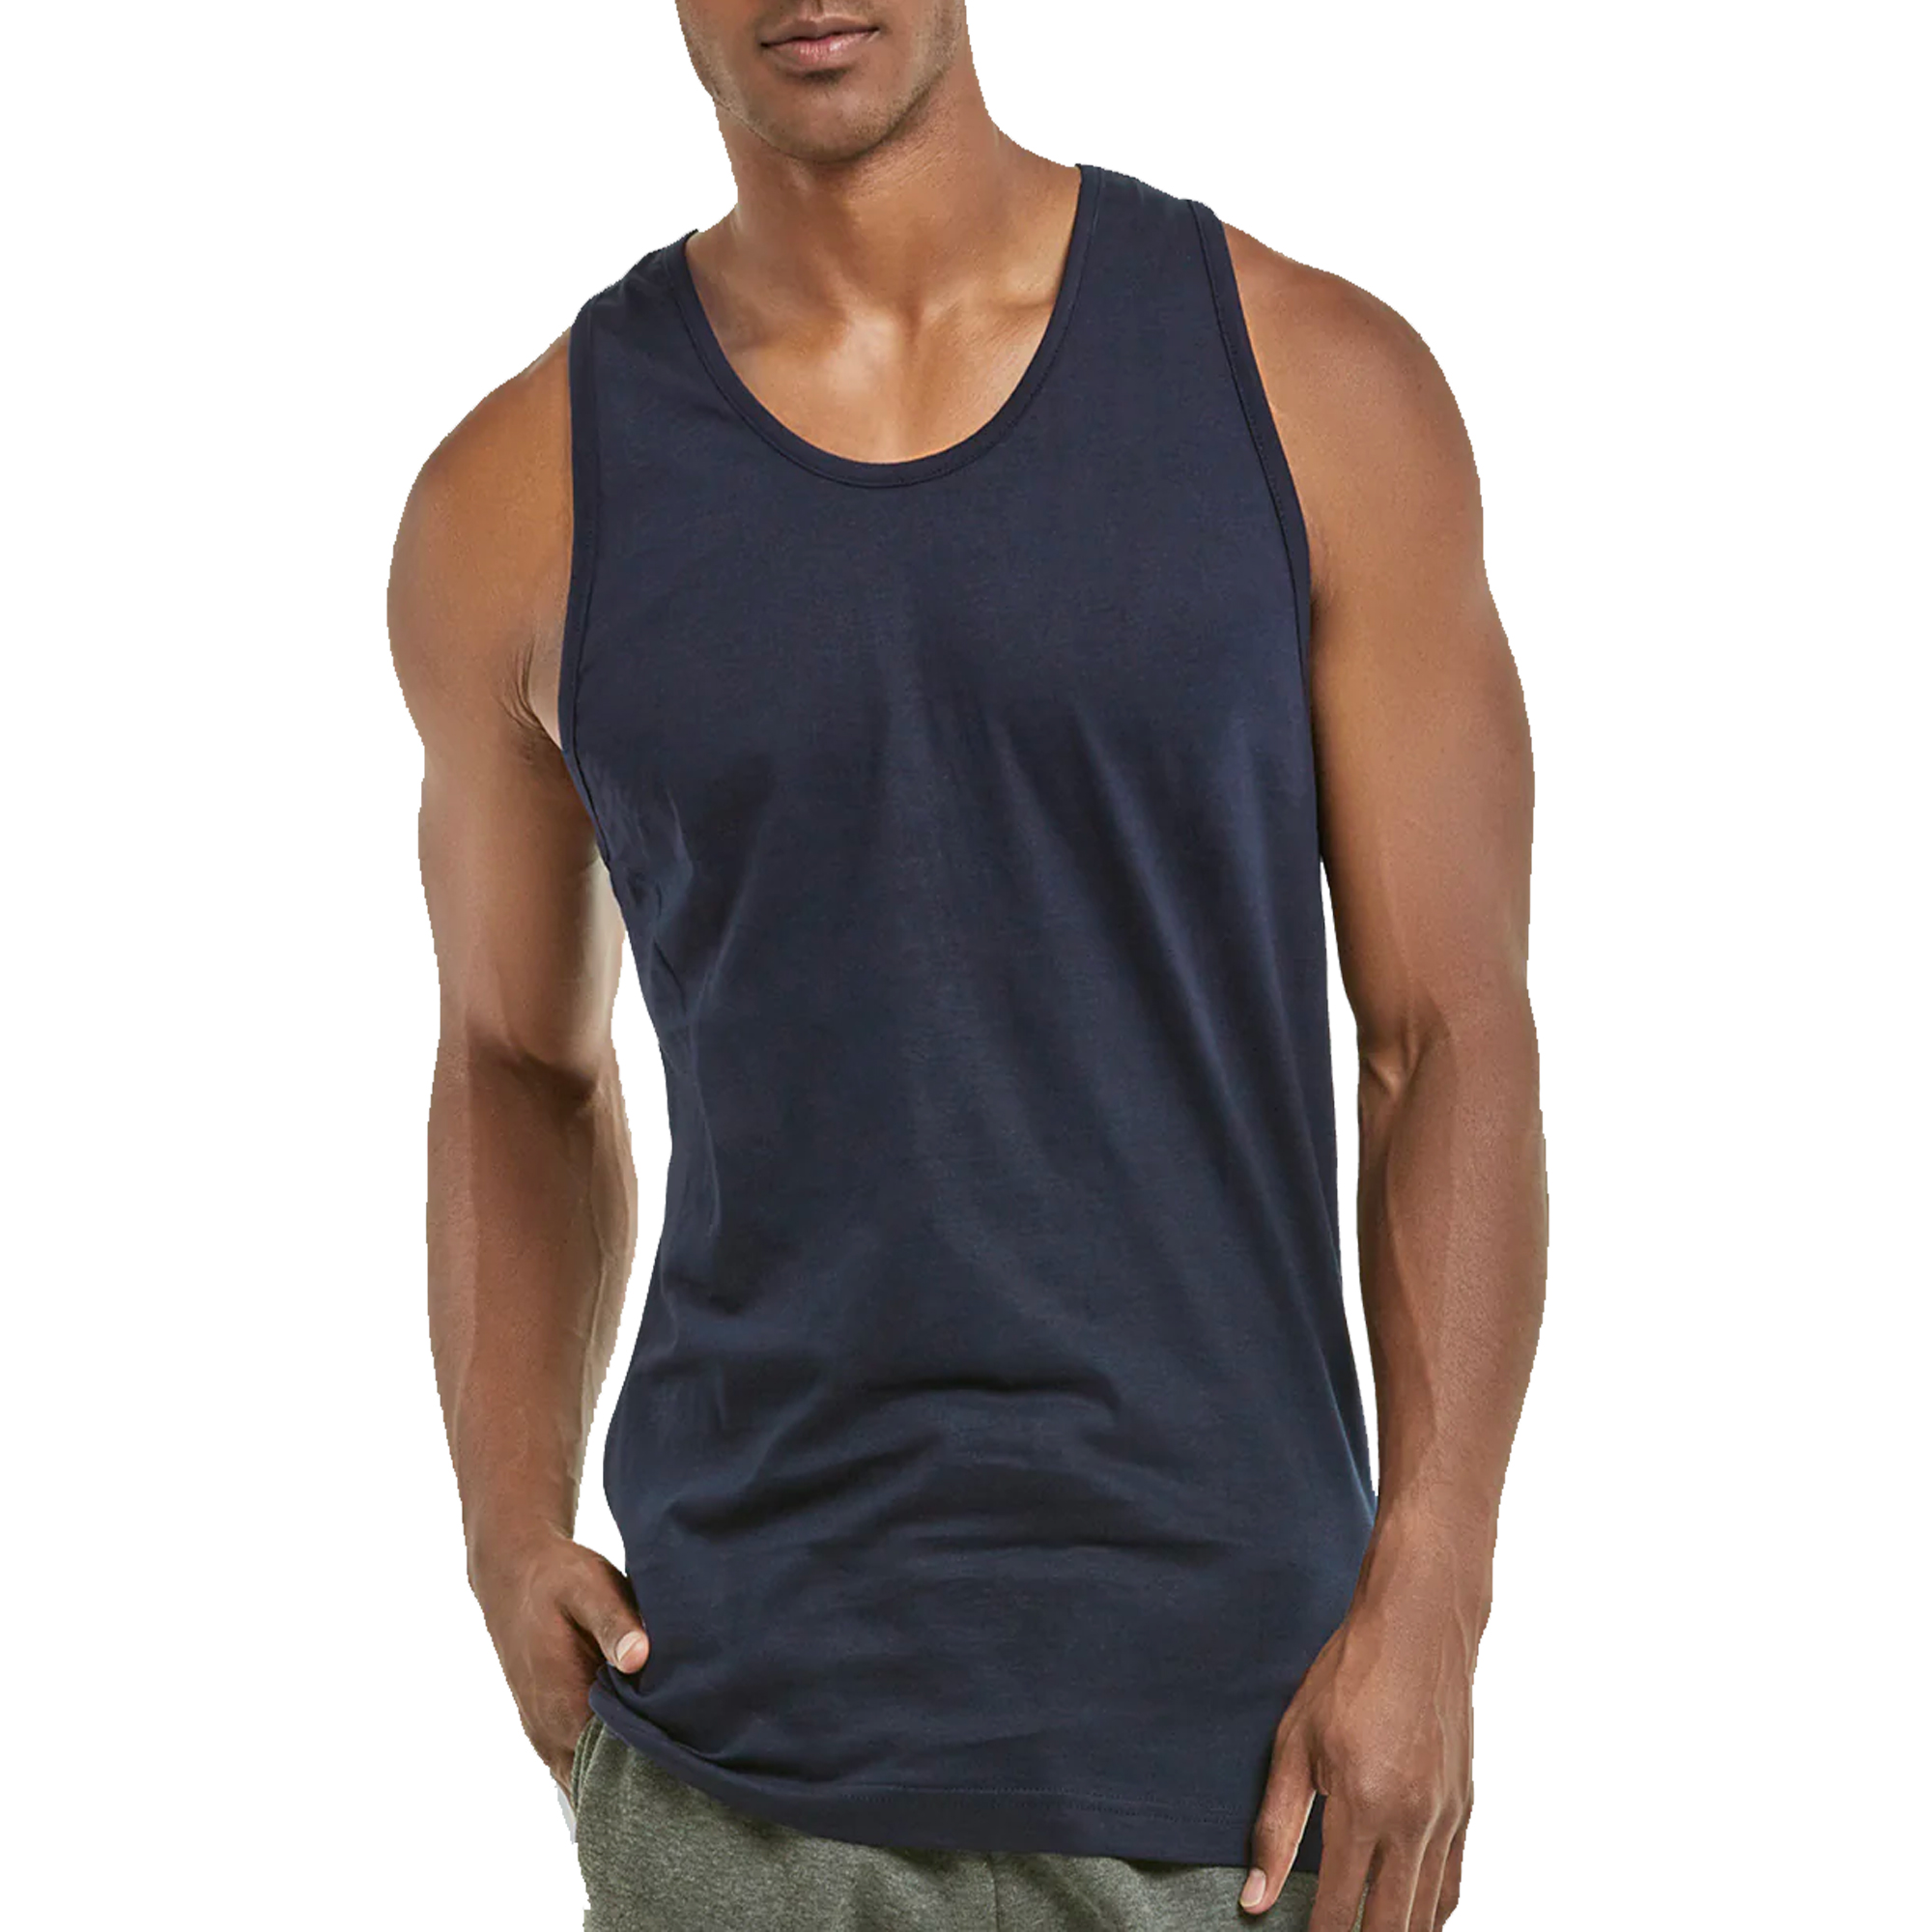 Men Loose Fit Tank Top Sleeveless Shirt Solid Workout Gym Blank Casual